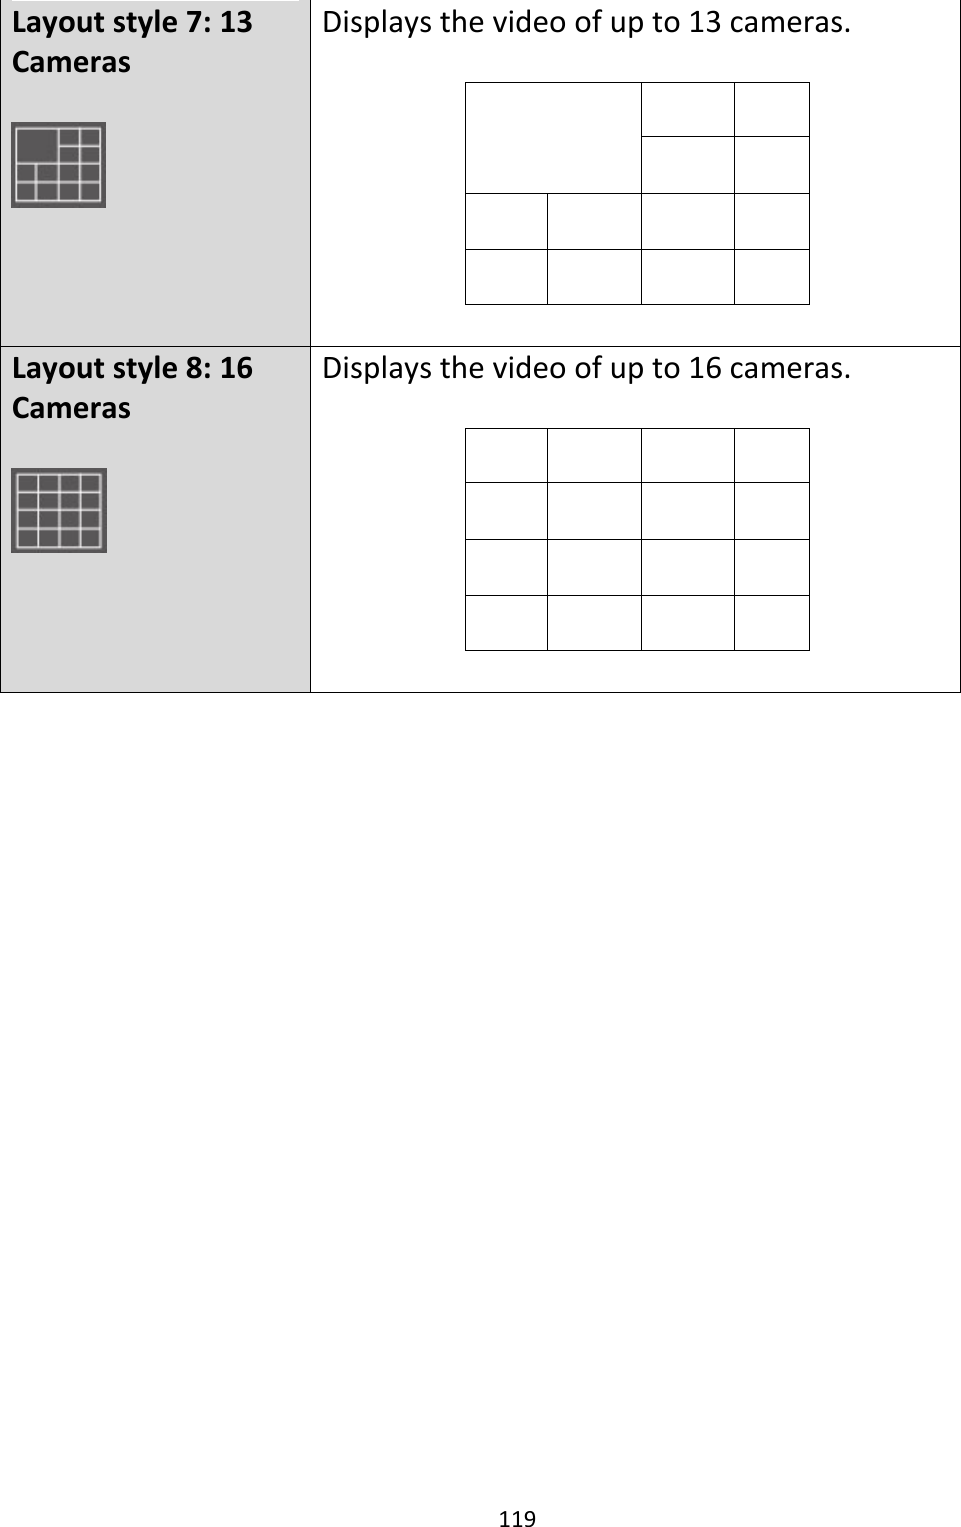 119   Layout style 7: 13 Cameras   Displays the video of up to 13 cameras.                  Layout style 8: 16 Cameras   Displays the video of up to 16 cameras.                      